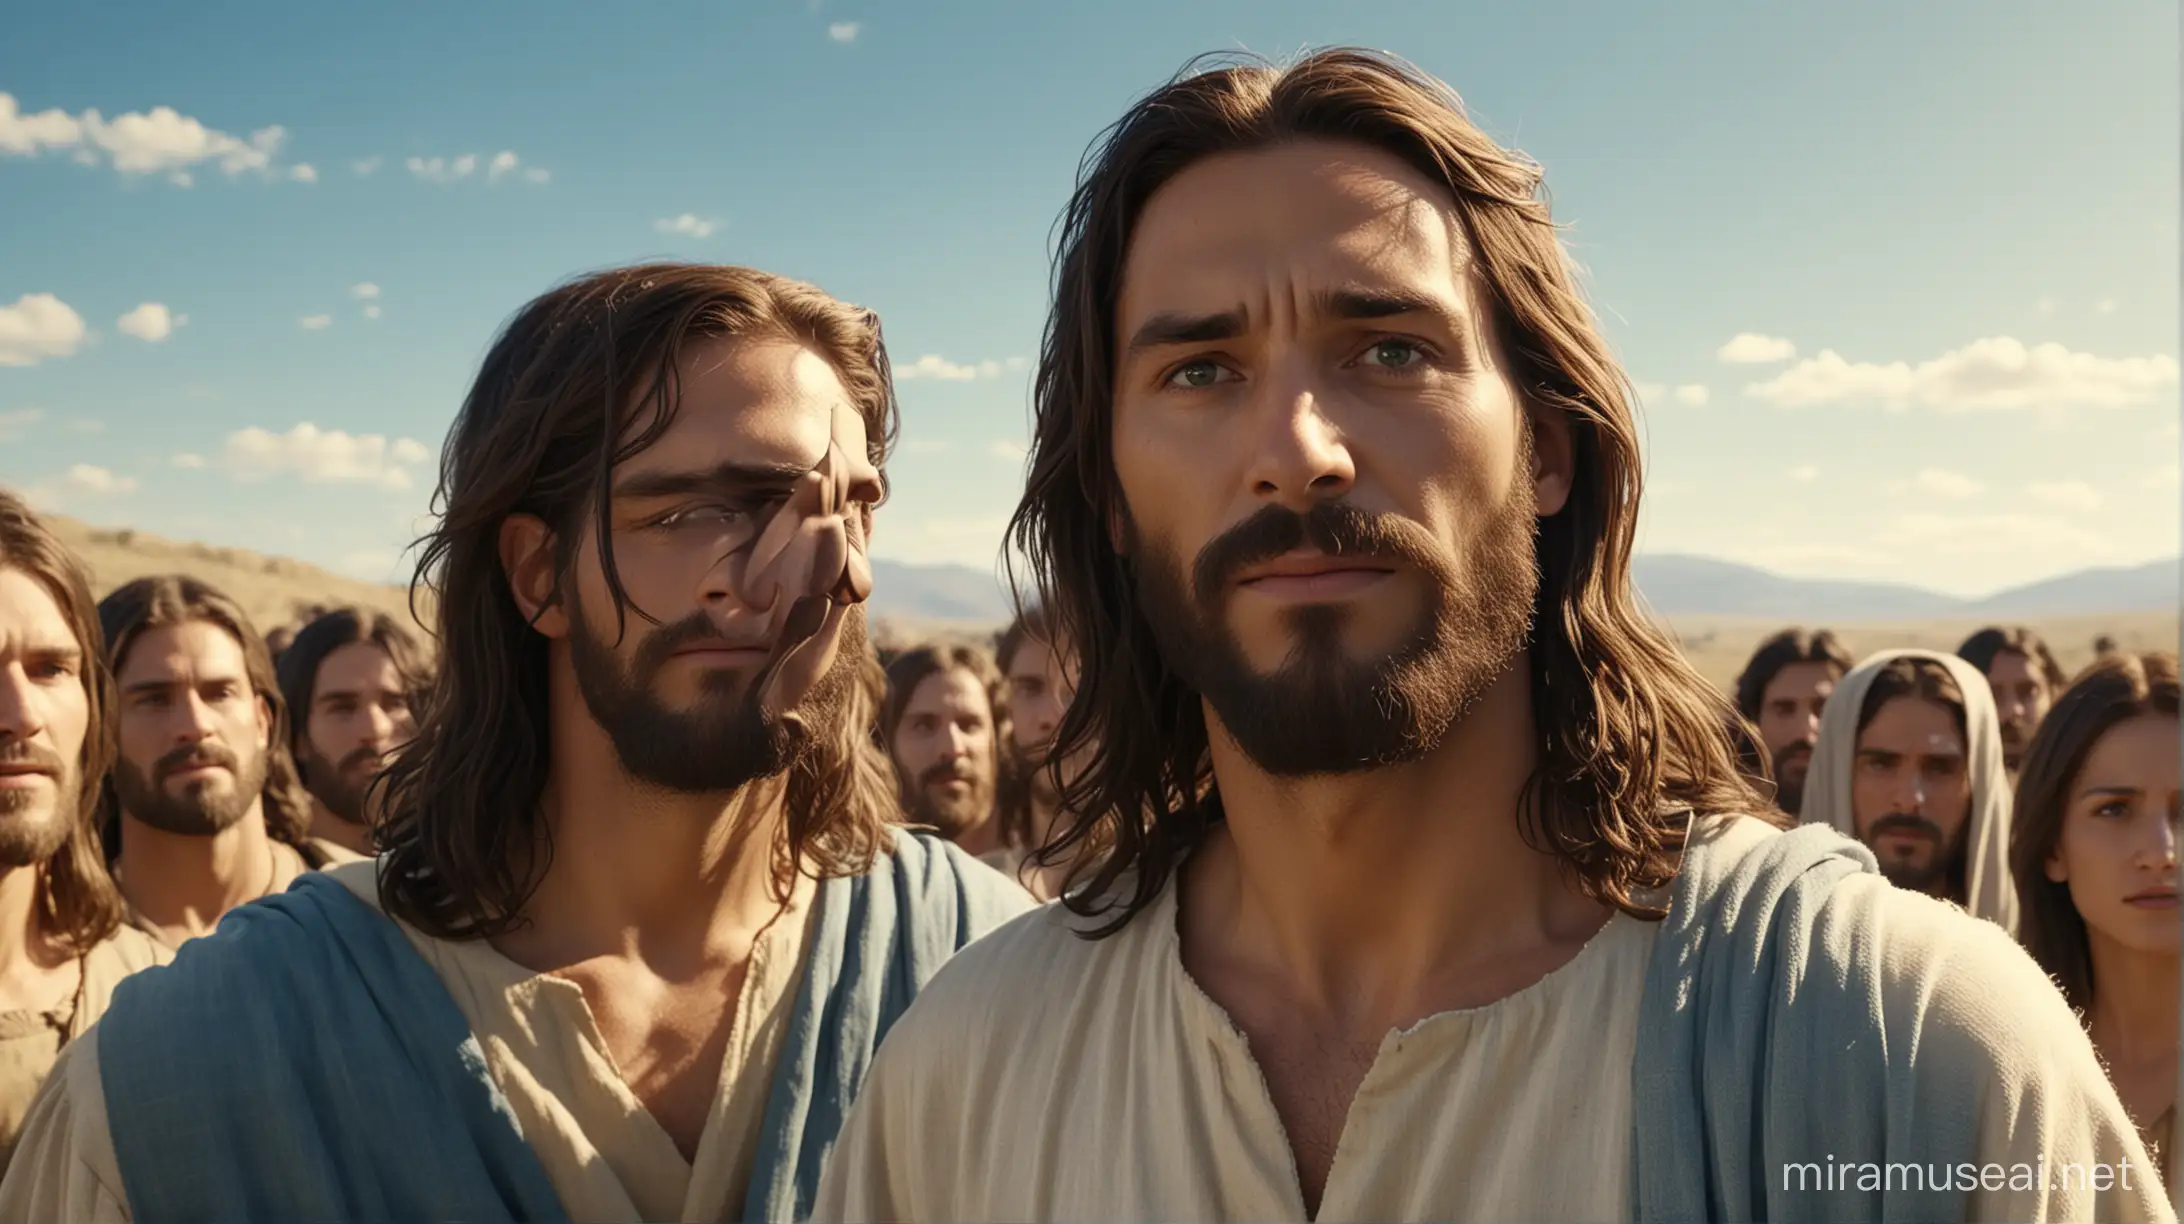 create an image of Jesus in an open field with his group of people, under a serene blue and sunny sky. 6k resolution, more realistic, based on the movie The Passion of the Christ.